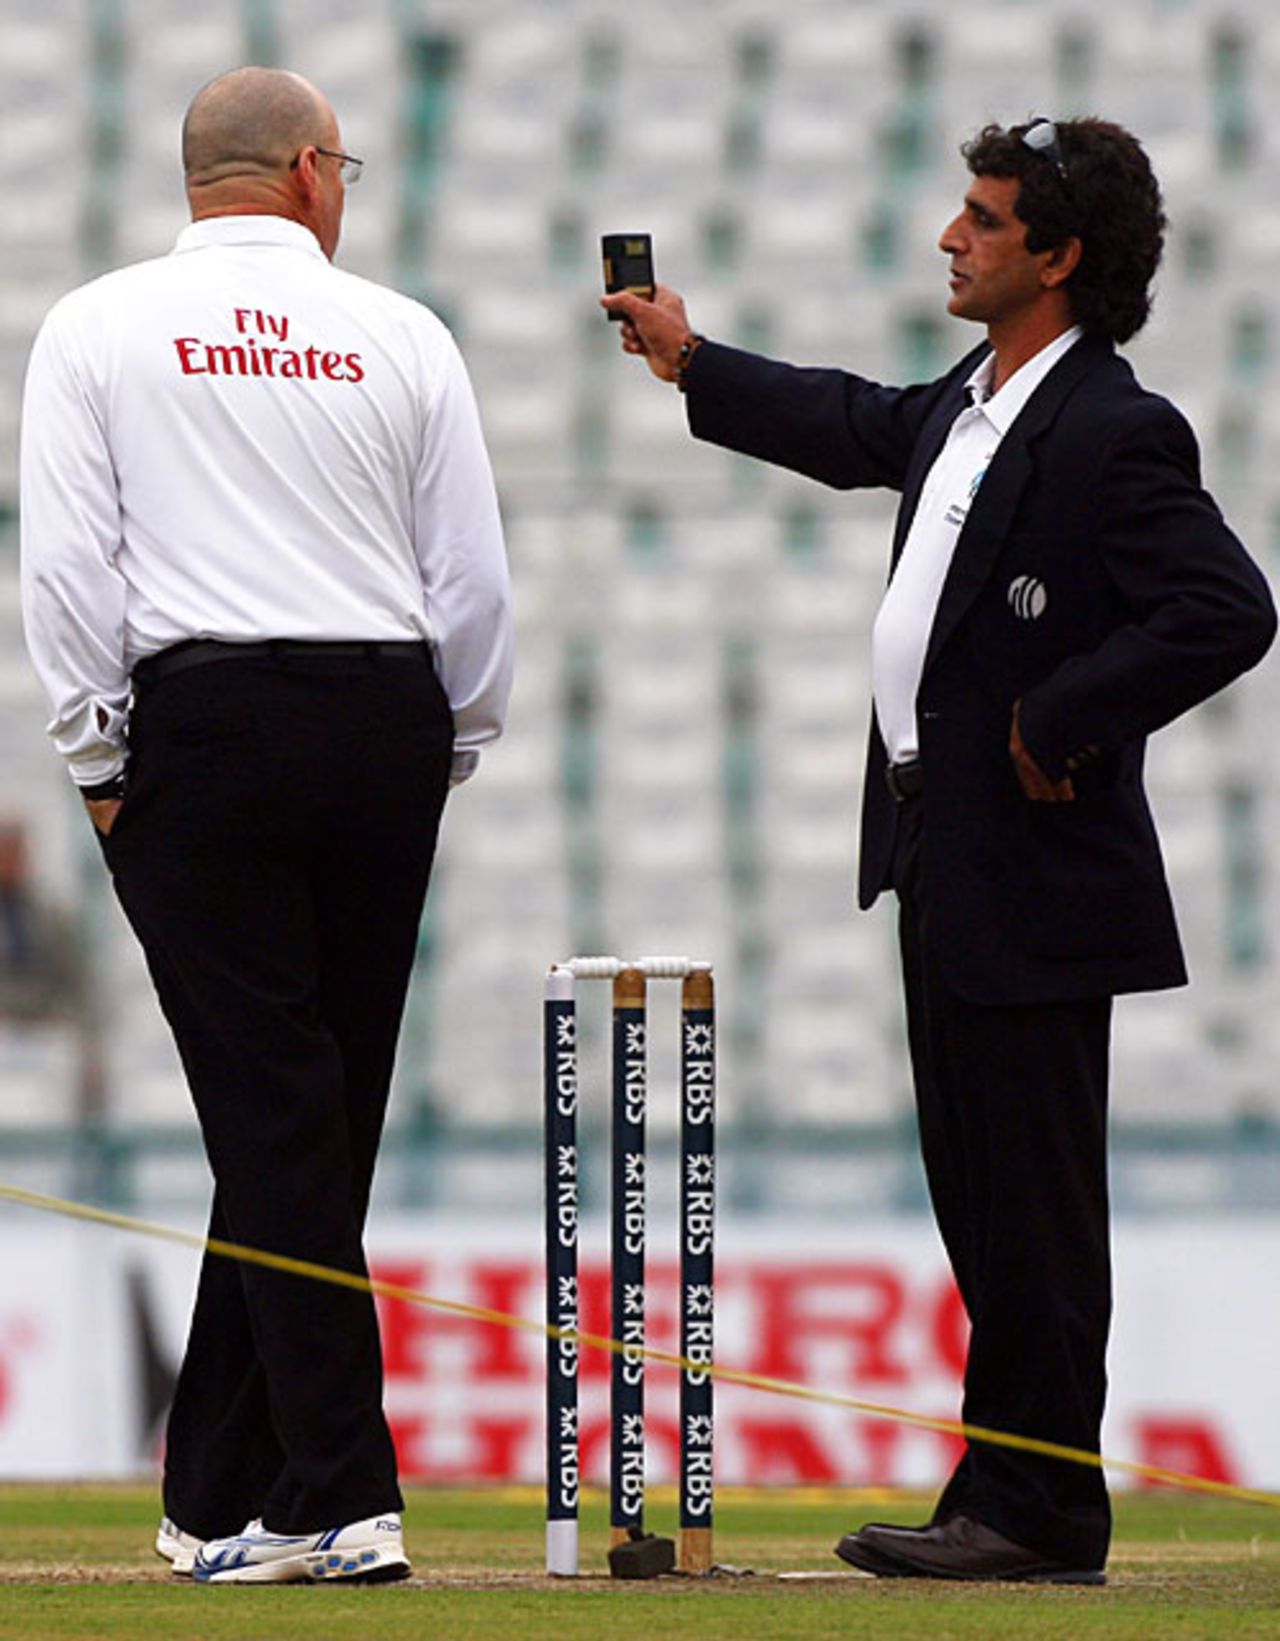 Umpire Asad Rauf checks the light conditions as his colleague Daryl Harper looks on, India v England, 2nd Test, Mohali, 1st day, December 19, 2008